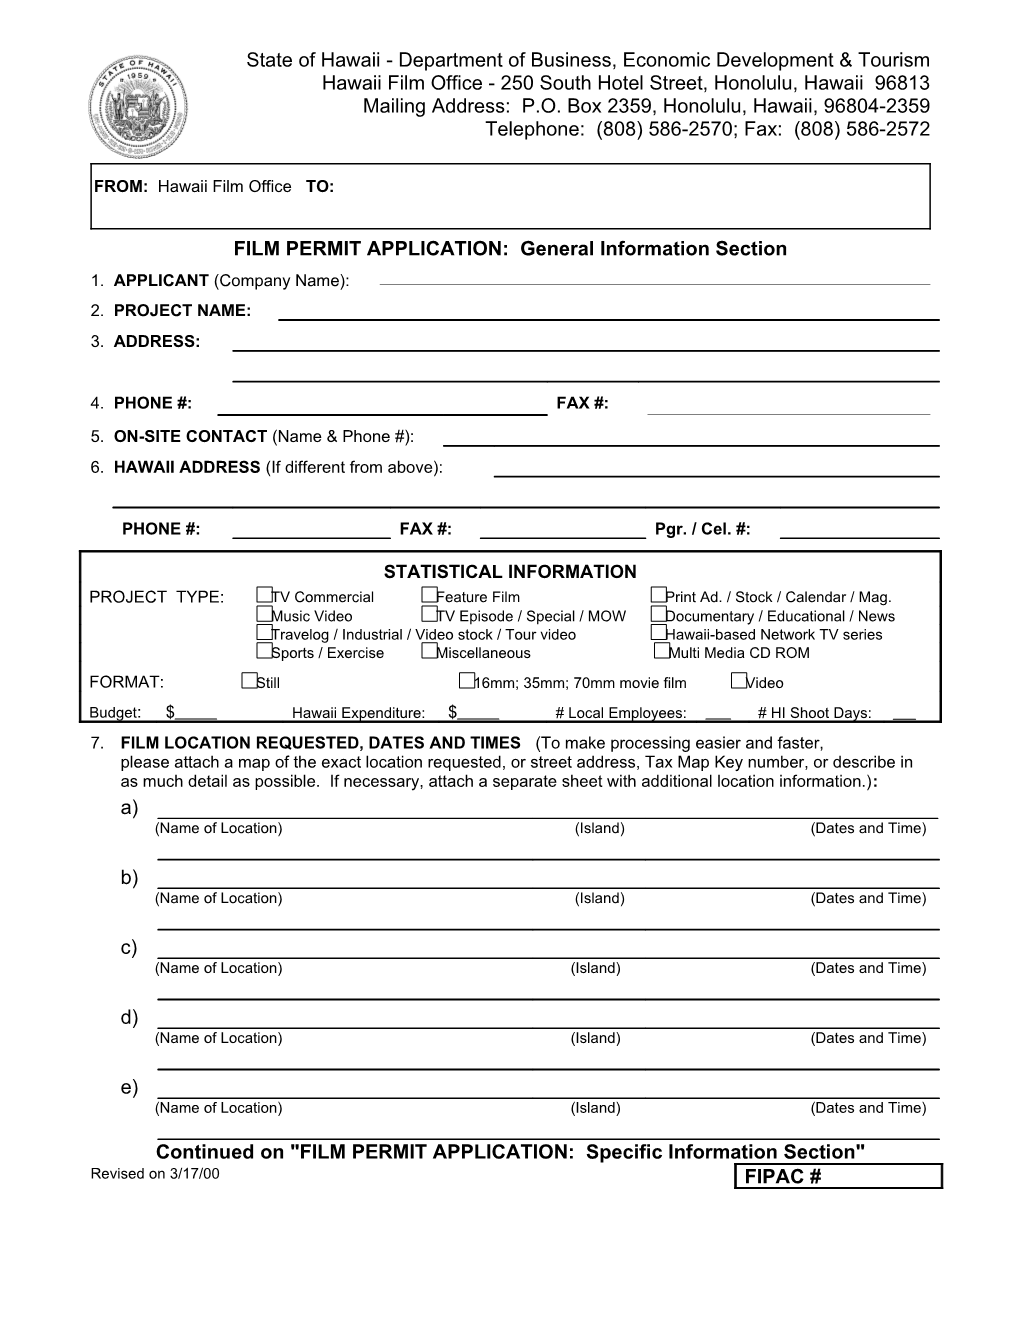 State of Hawaii Film Permit Application: Page 1: General Information Section